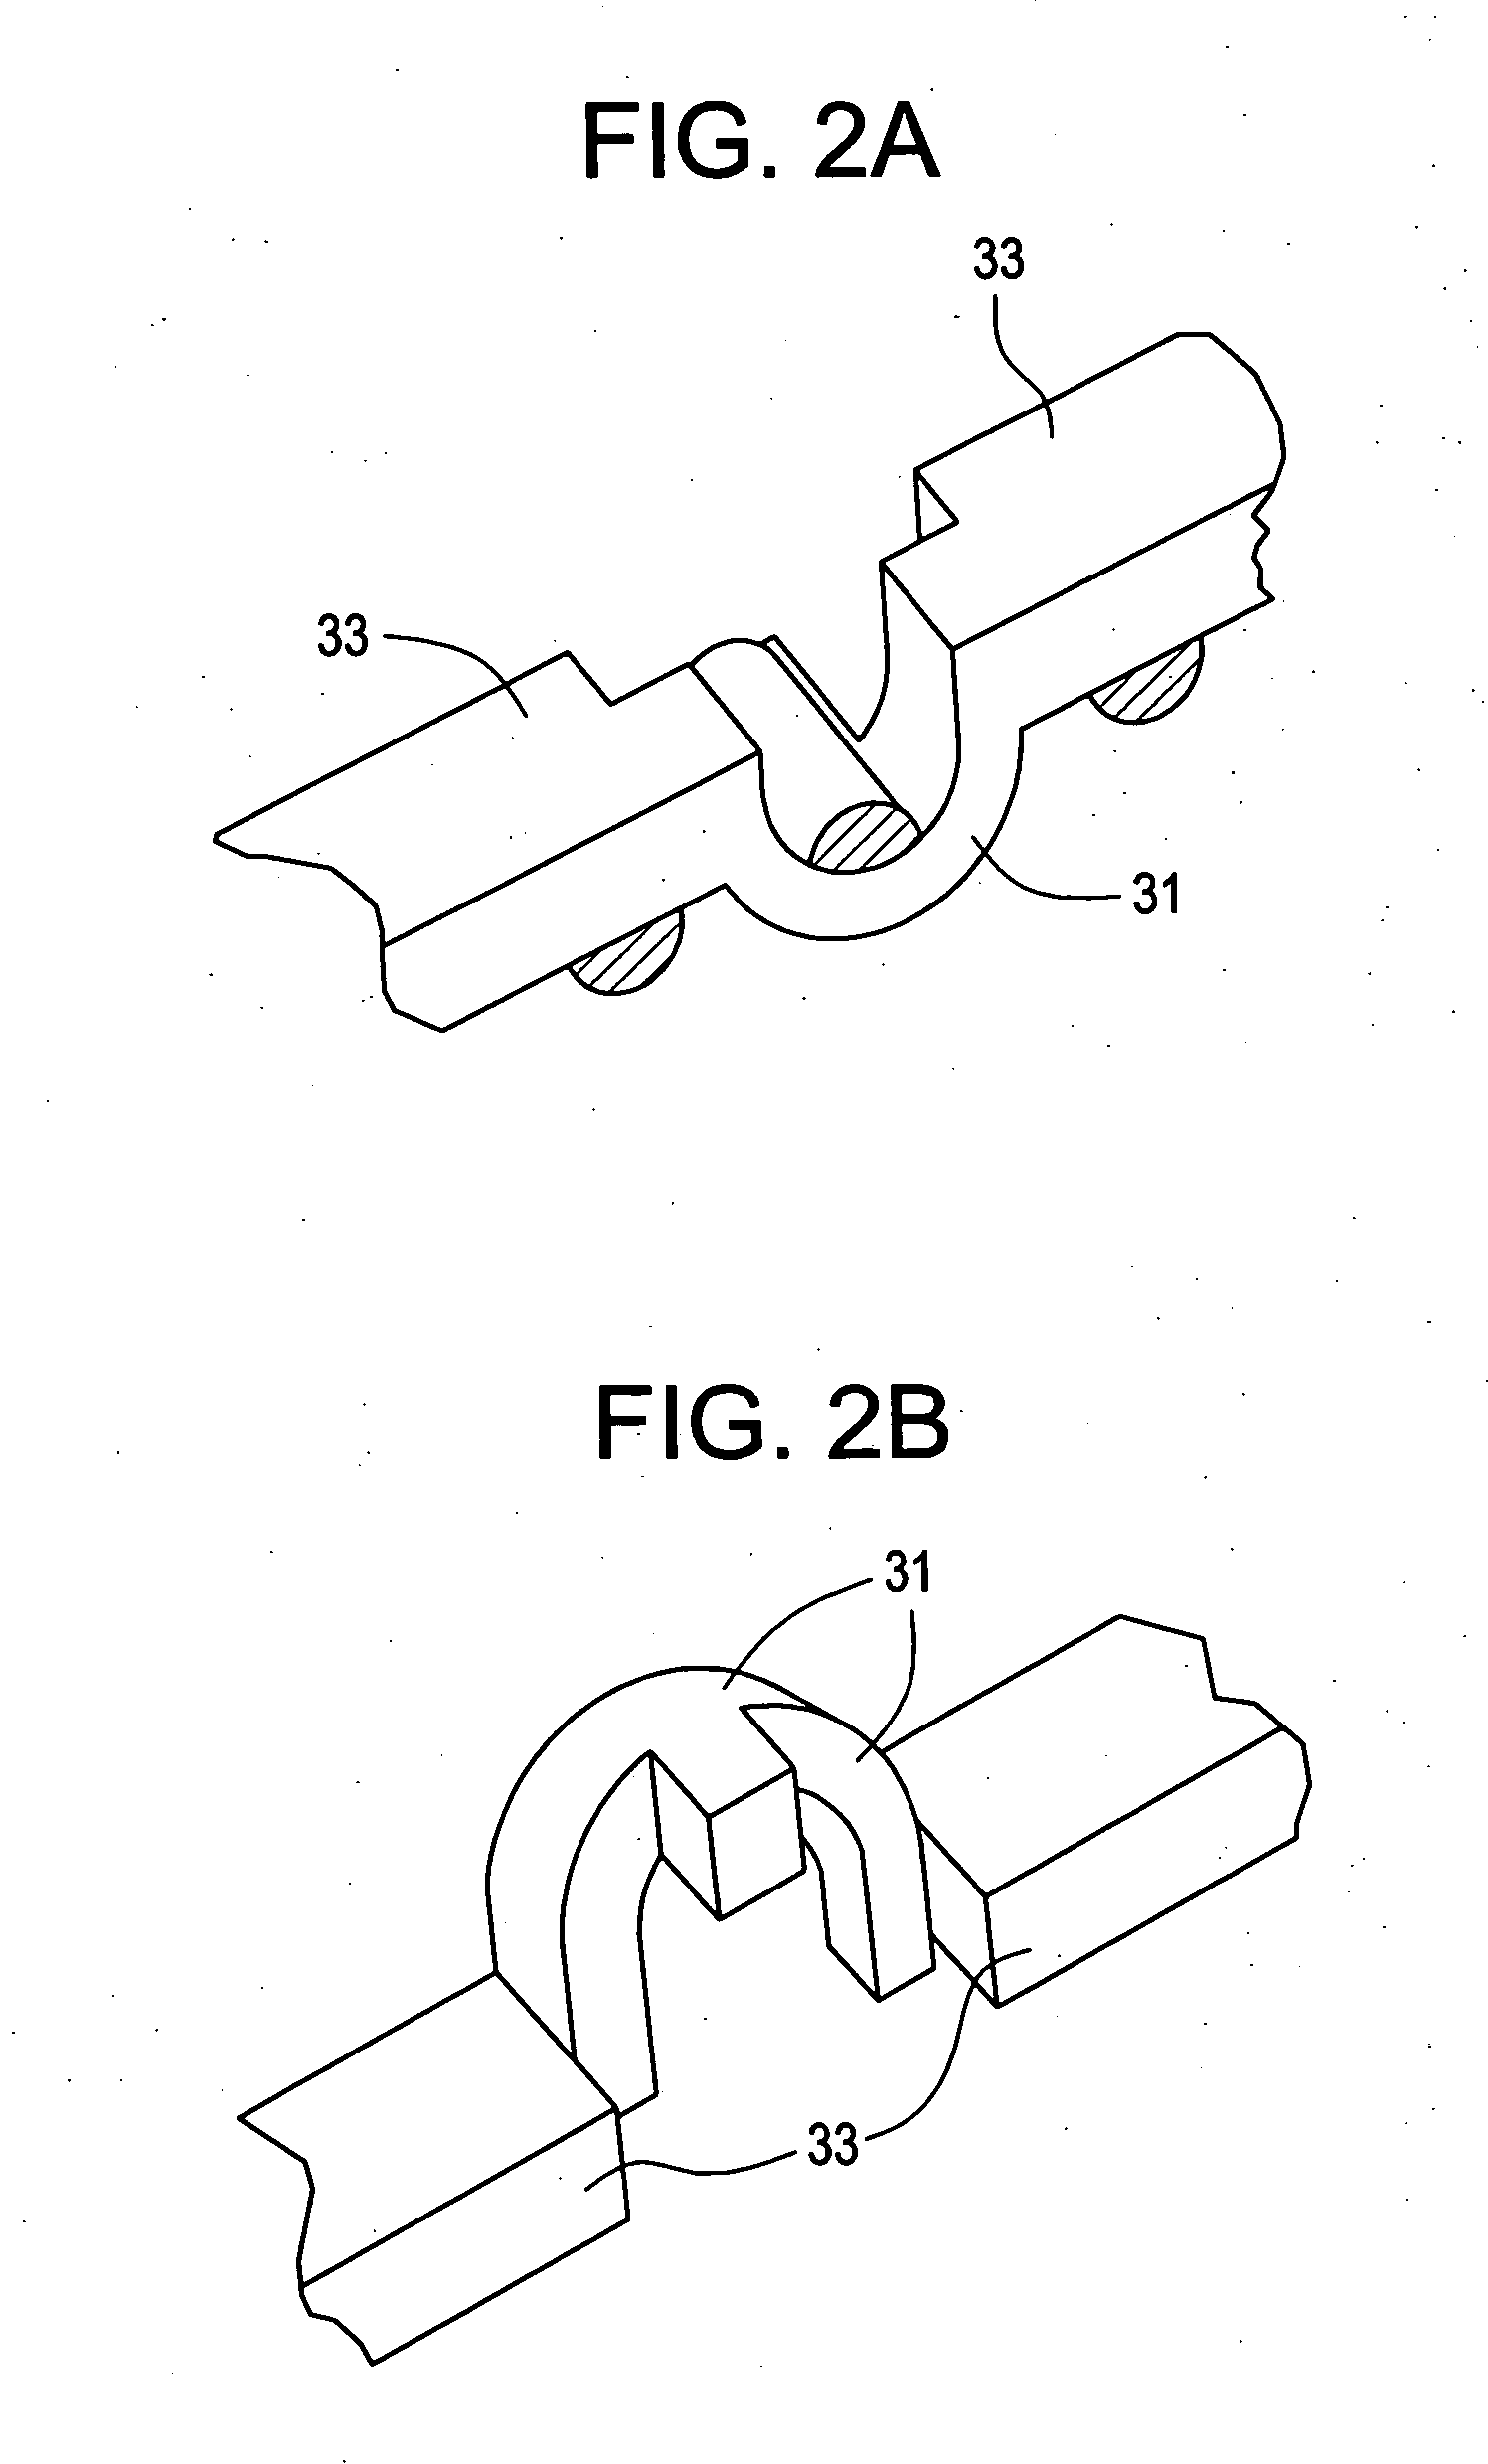 Artificial facet joint device having a compression spring